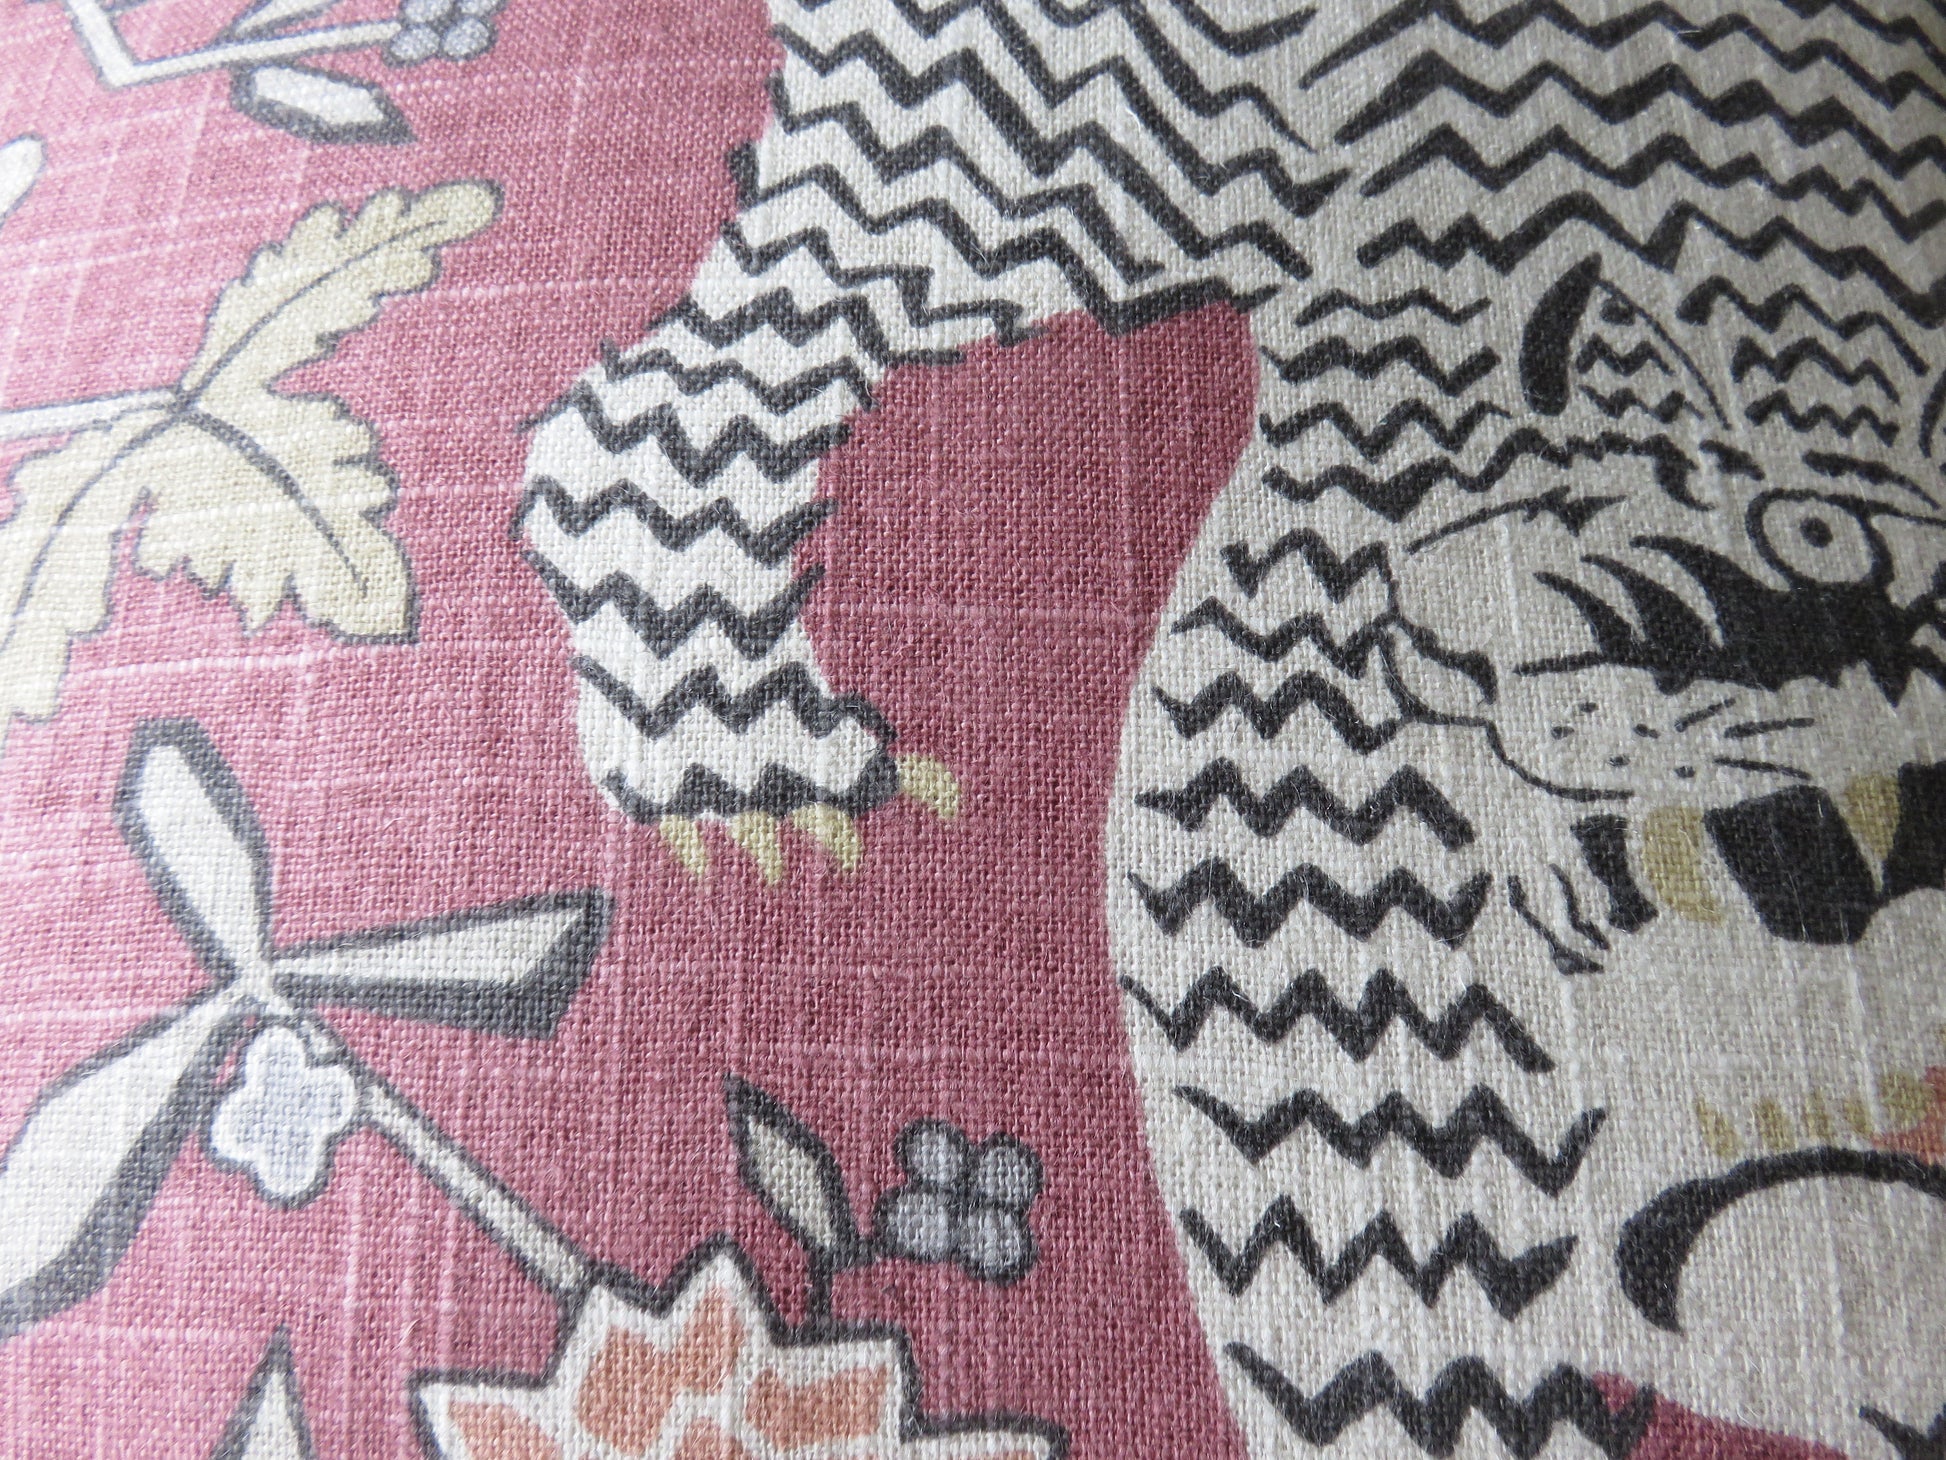 dusty pink tiger pillow cover made from Richloom theodore in tose madder